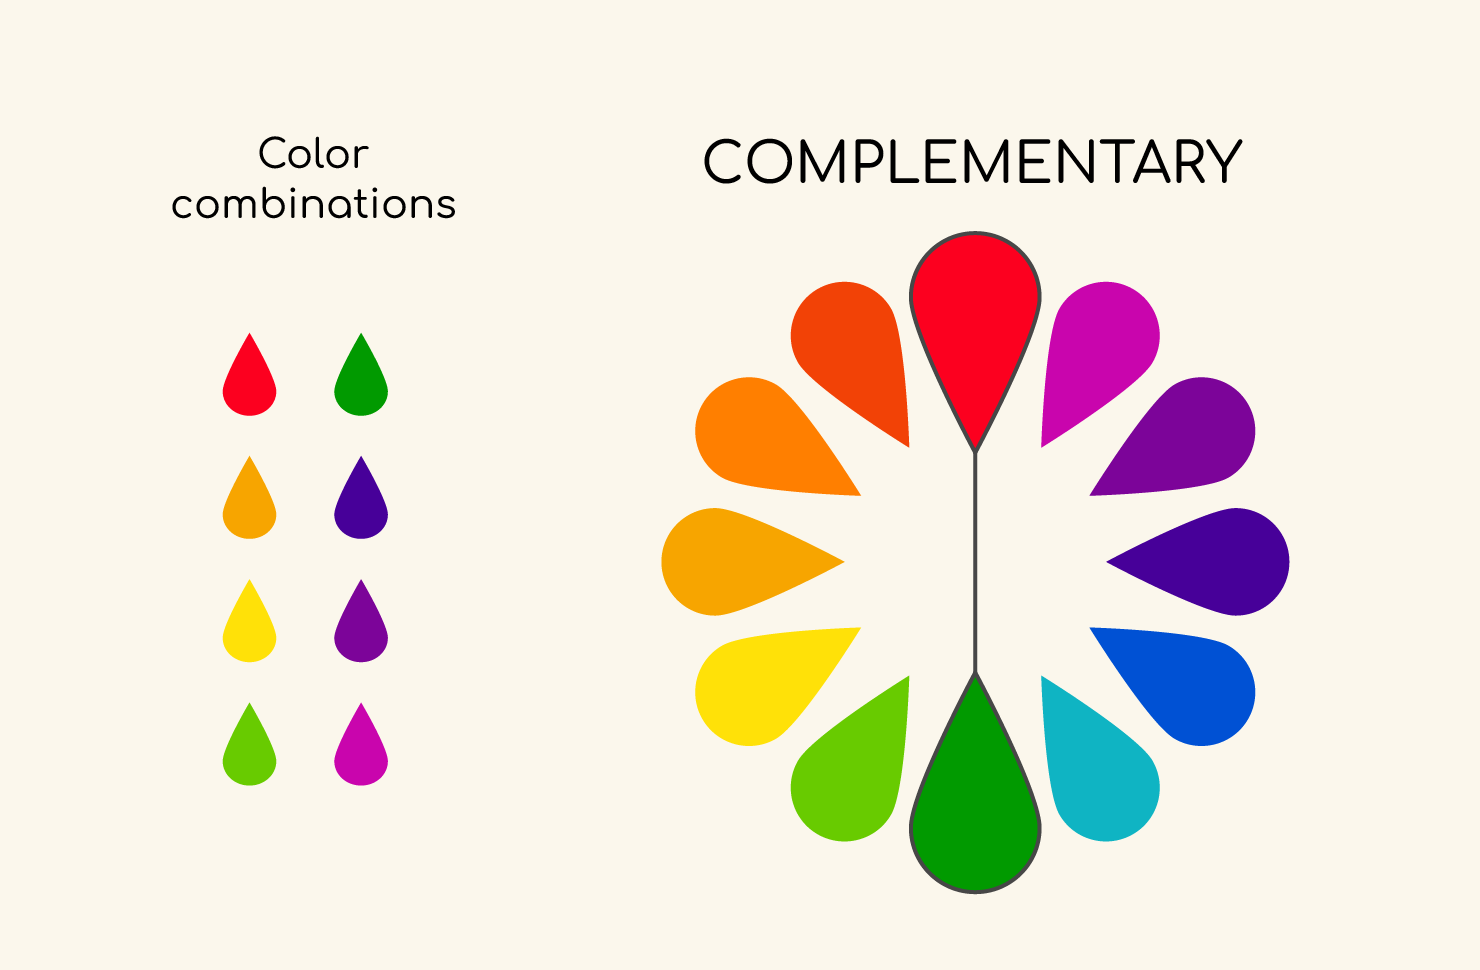 What Are Intermediate Colors and How Are They Made? - Color Meanings